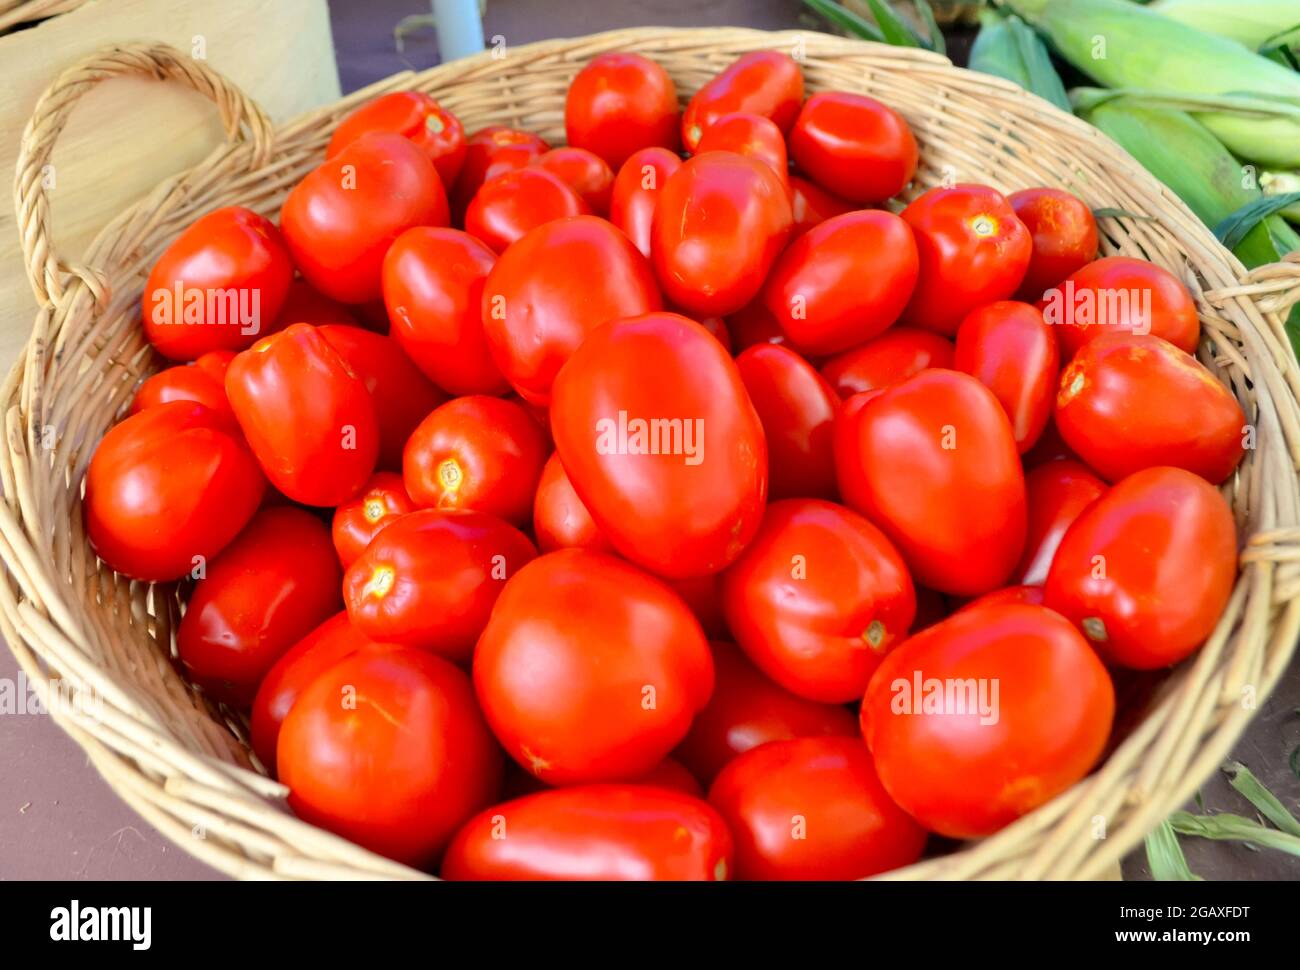 Red ripe plum tomatoes in a wicker basket for sale at a local farm stand. Closeup. Stock Photo